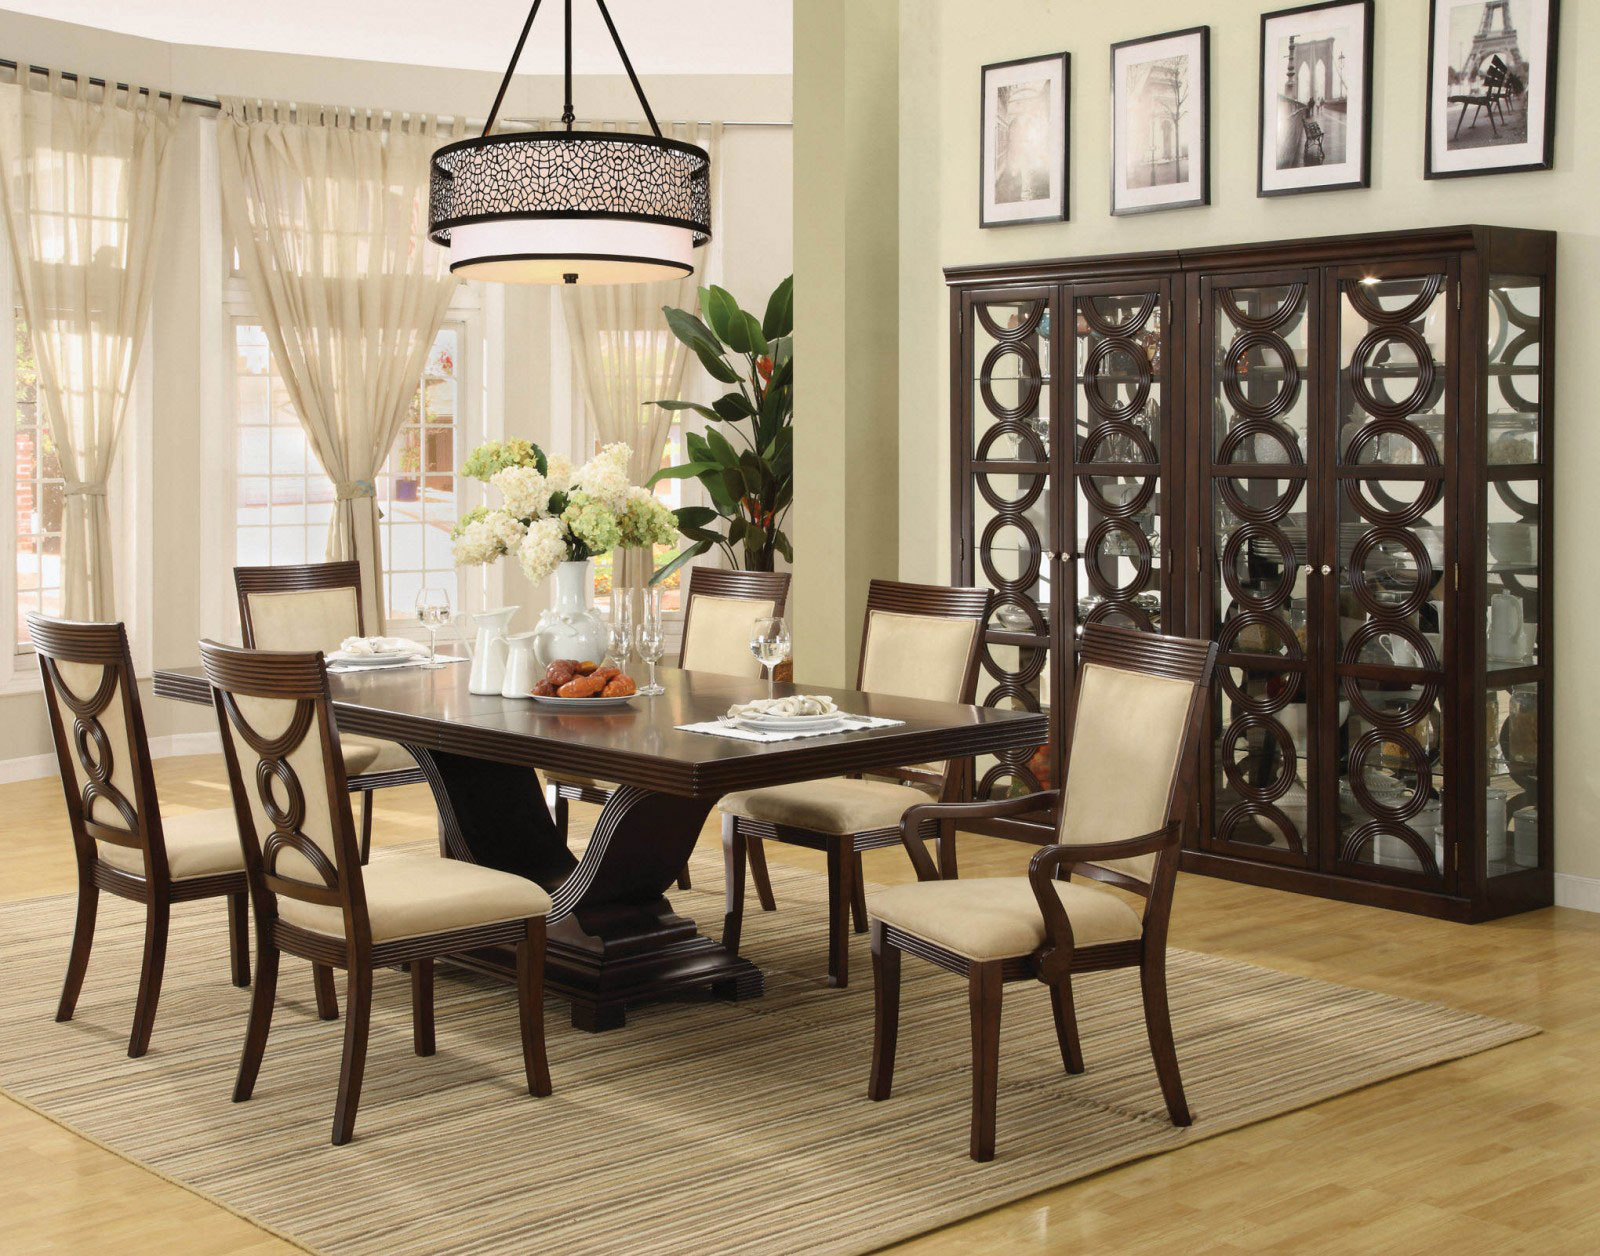 Buffet Furniture Chairs Unusual Buffet Furniture Feat Upholstered Chairs Design Also Contemporary Drum Shade Chandelier And Large Dining Table Idea Furniture  Extraordinarily Room Use Drum Shade Chandelier 